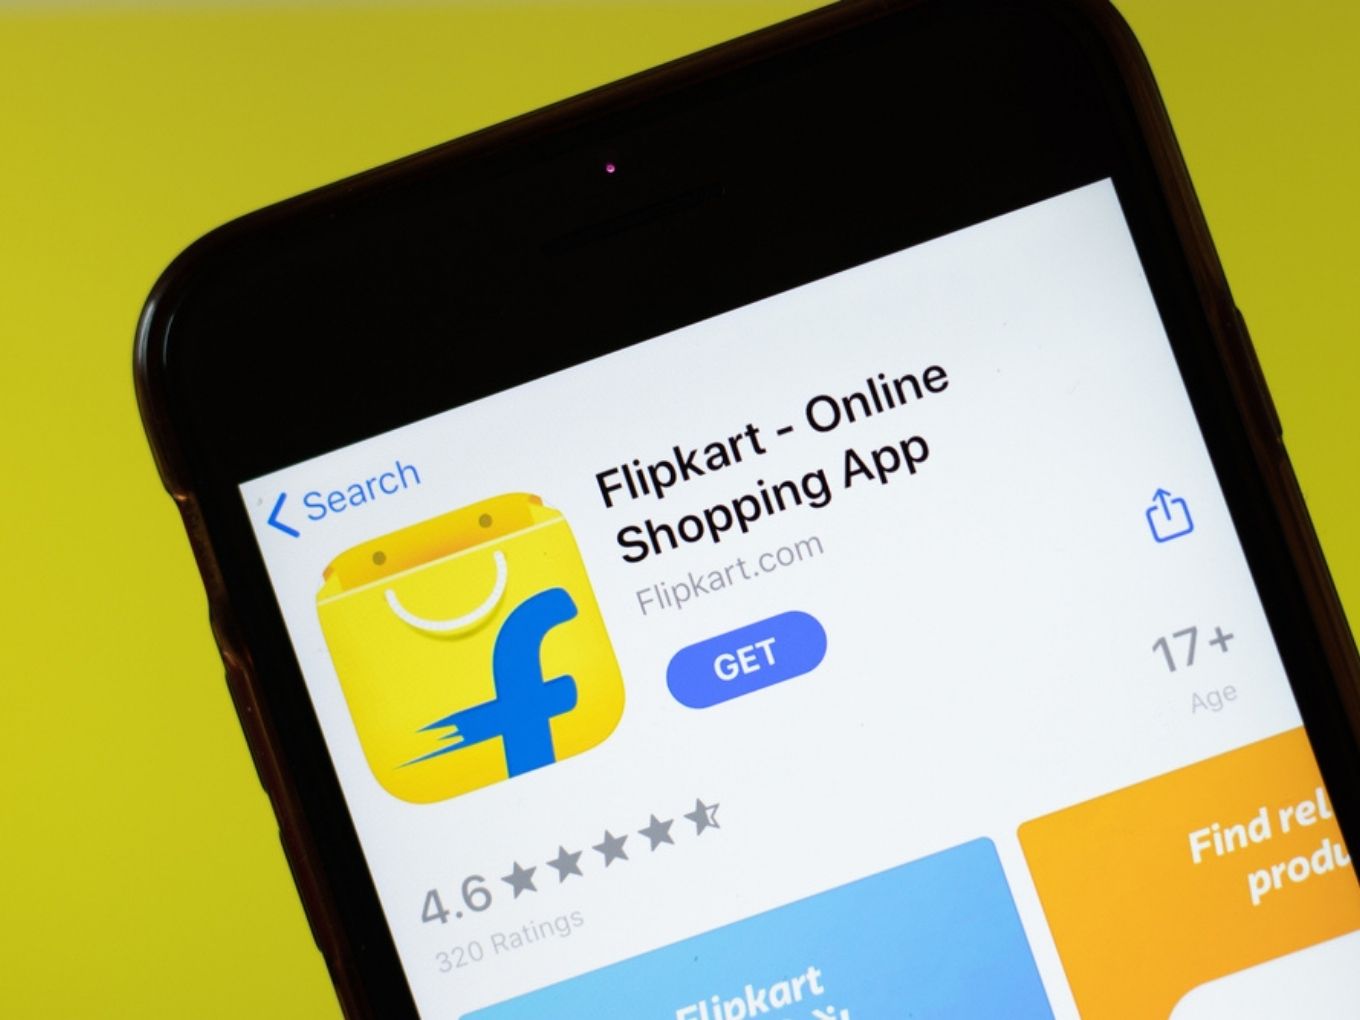 Amidst Border Standoff, Flipkart Bags $62.8 Mn From China-Based Tencent